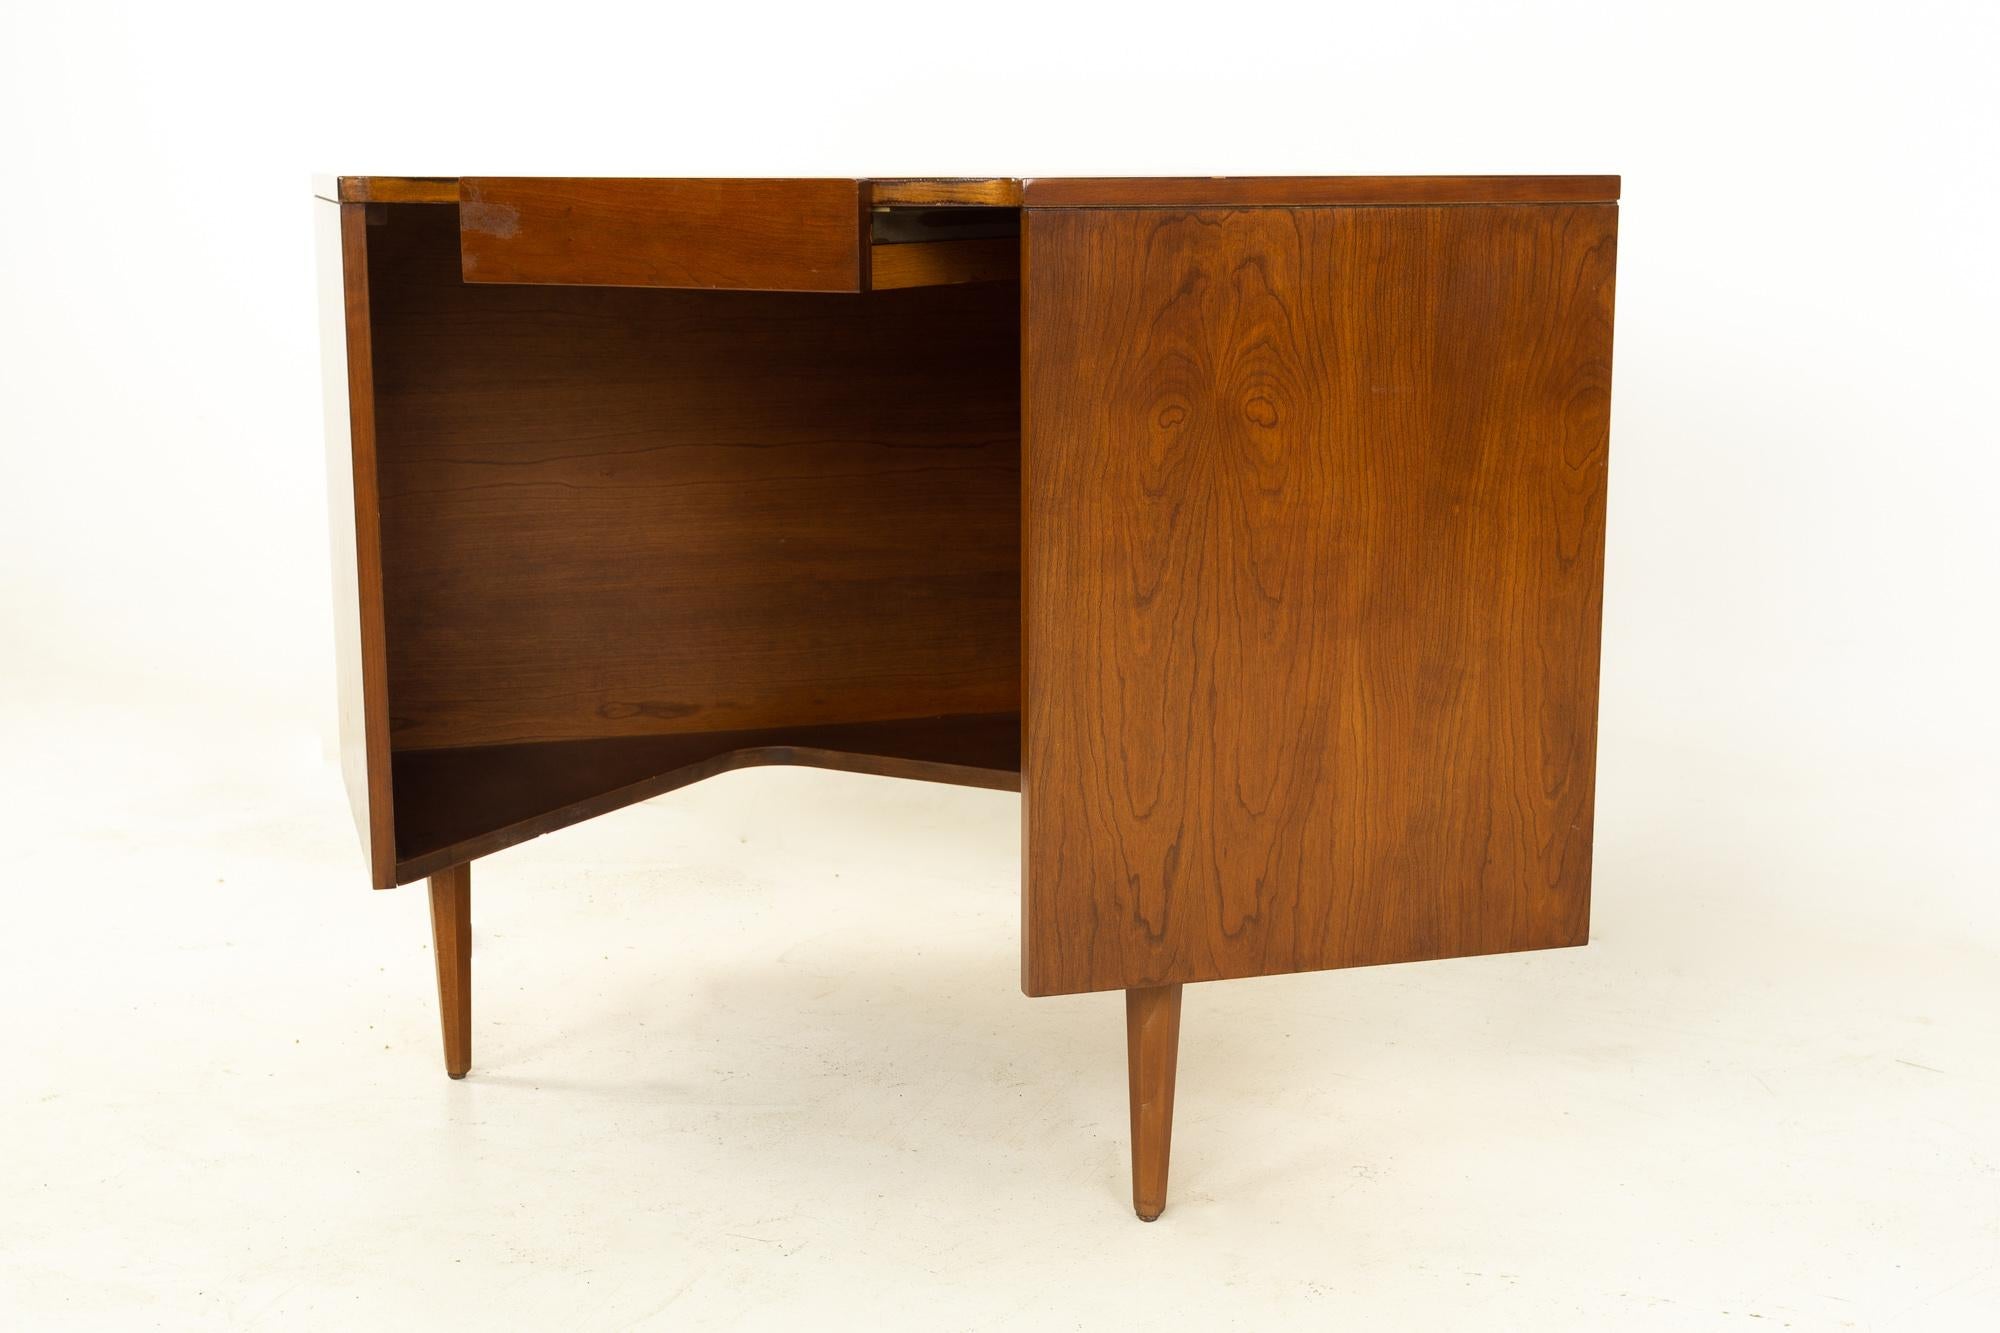 Kipp Stewart American Design Foundation Mid Century solid cherry corner desk
This desk measures: 47.5 wide x 36.25 deep x 22.25 inches high

All pieces of furniture can be had in what we call restored vintage condition. That means the piece is